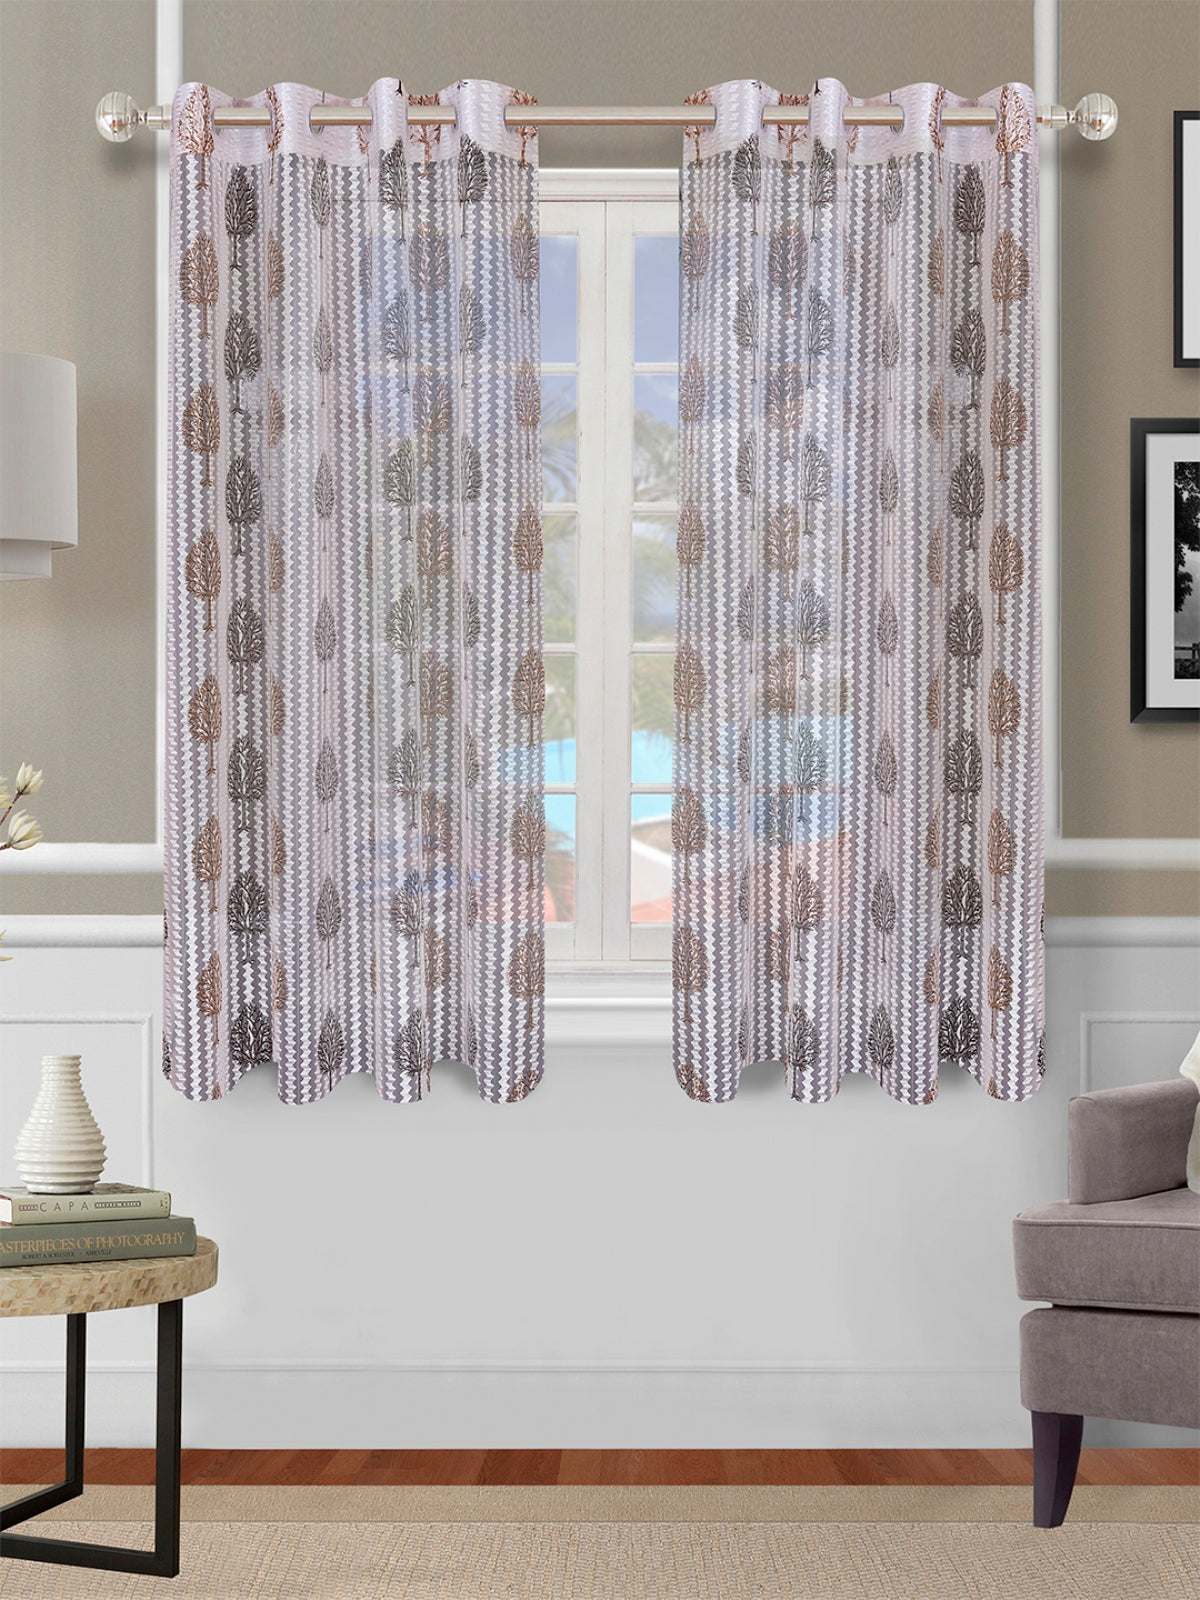 Romee Brown & Off White Floral Patterned Set of 2 Window Curtains